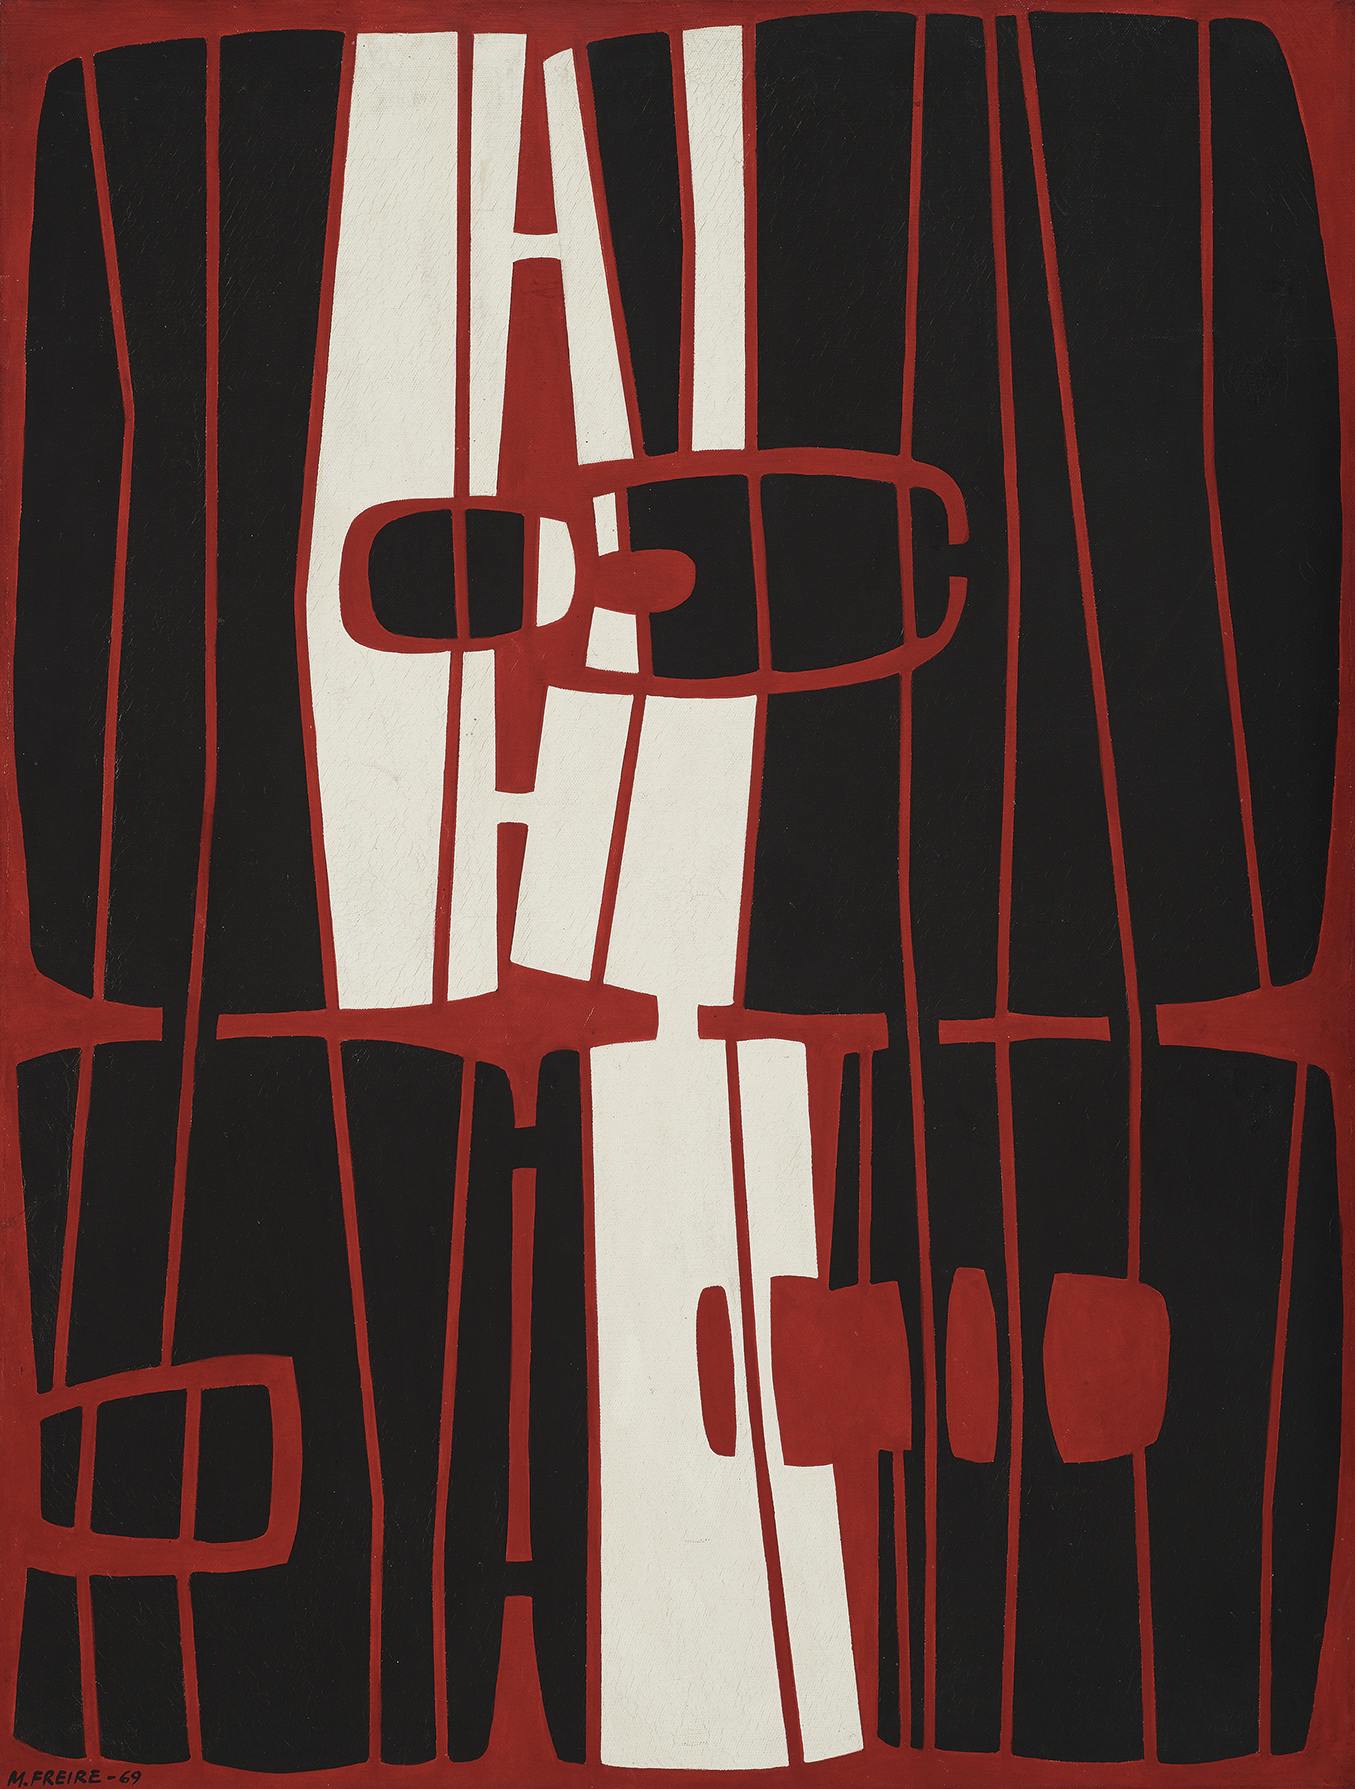 A painting of abstract black and white shapes on a red background.